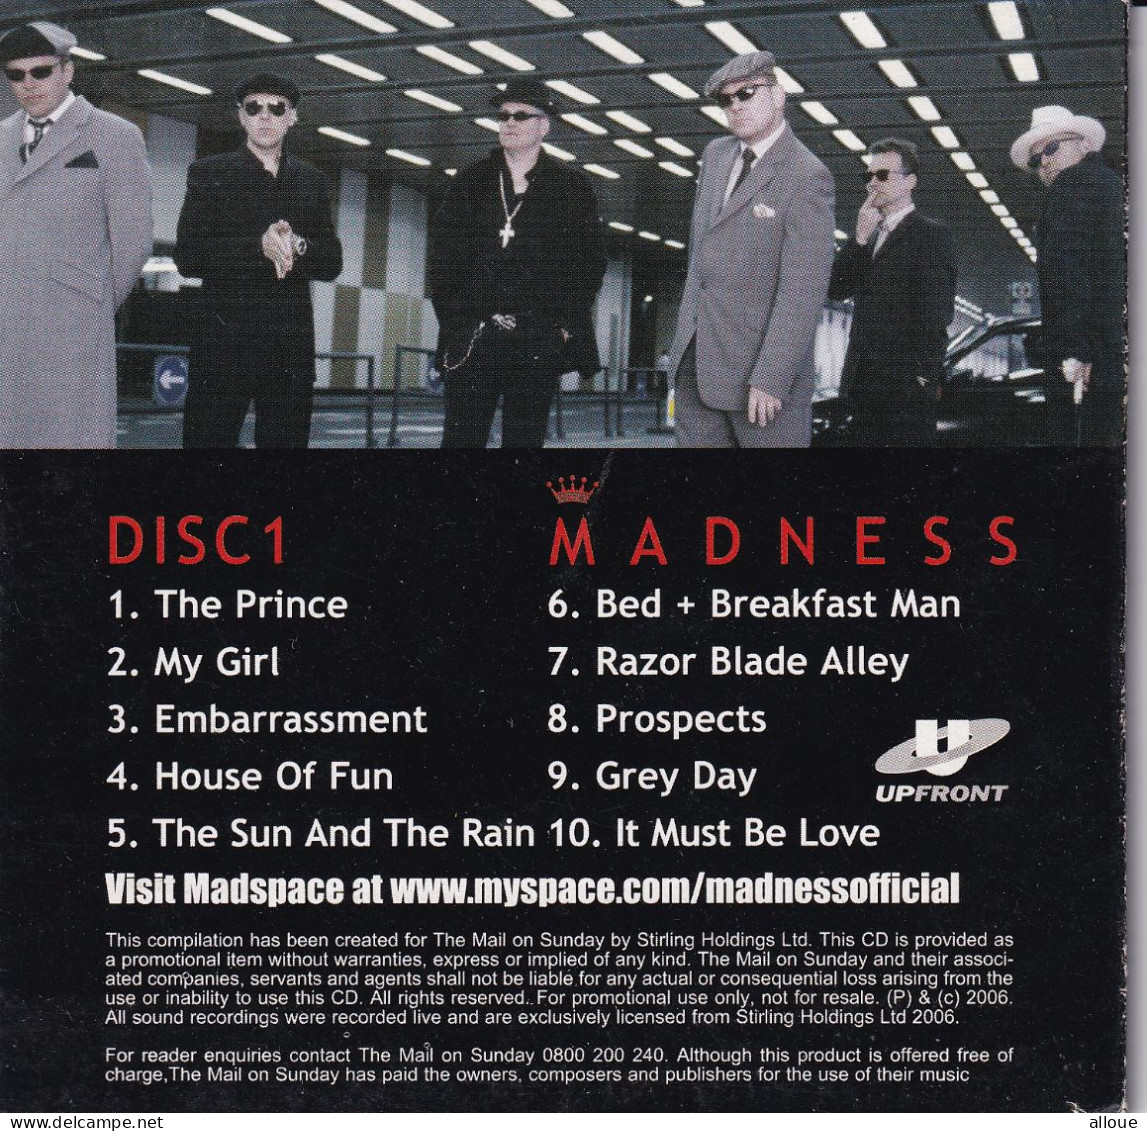 MADNESS - CD THE SUNDAY TIME POCHETTE CARTON - THE EDGE OF THE UNIVERS AND BEYOND PART 1 (LIVE 9 Titres) - Other - English Music